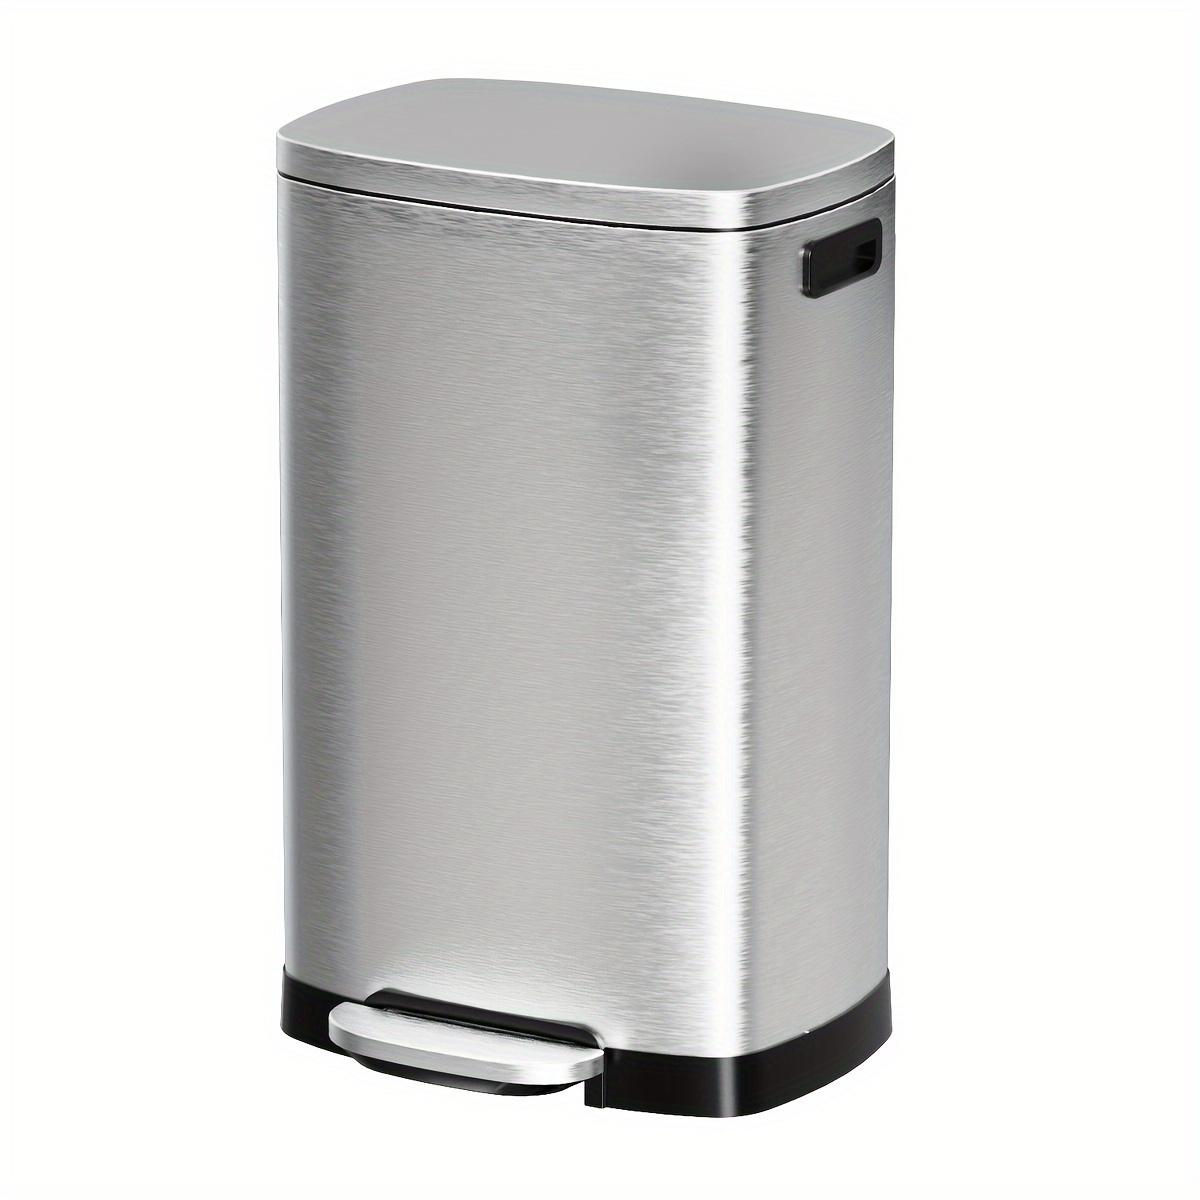 

1pc Stainless Steel Trash Can With Soft-close Lid, Fingerprint-resistant, Hands-free Step, Heavy Duty Rectangle Garbage Bin For Commercial/home Kitchen Use (13.2 Gallon/50l)